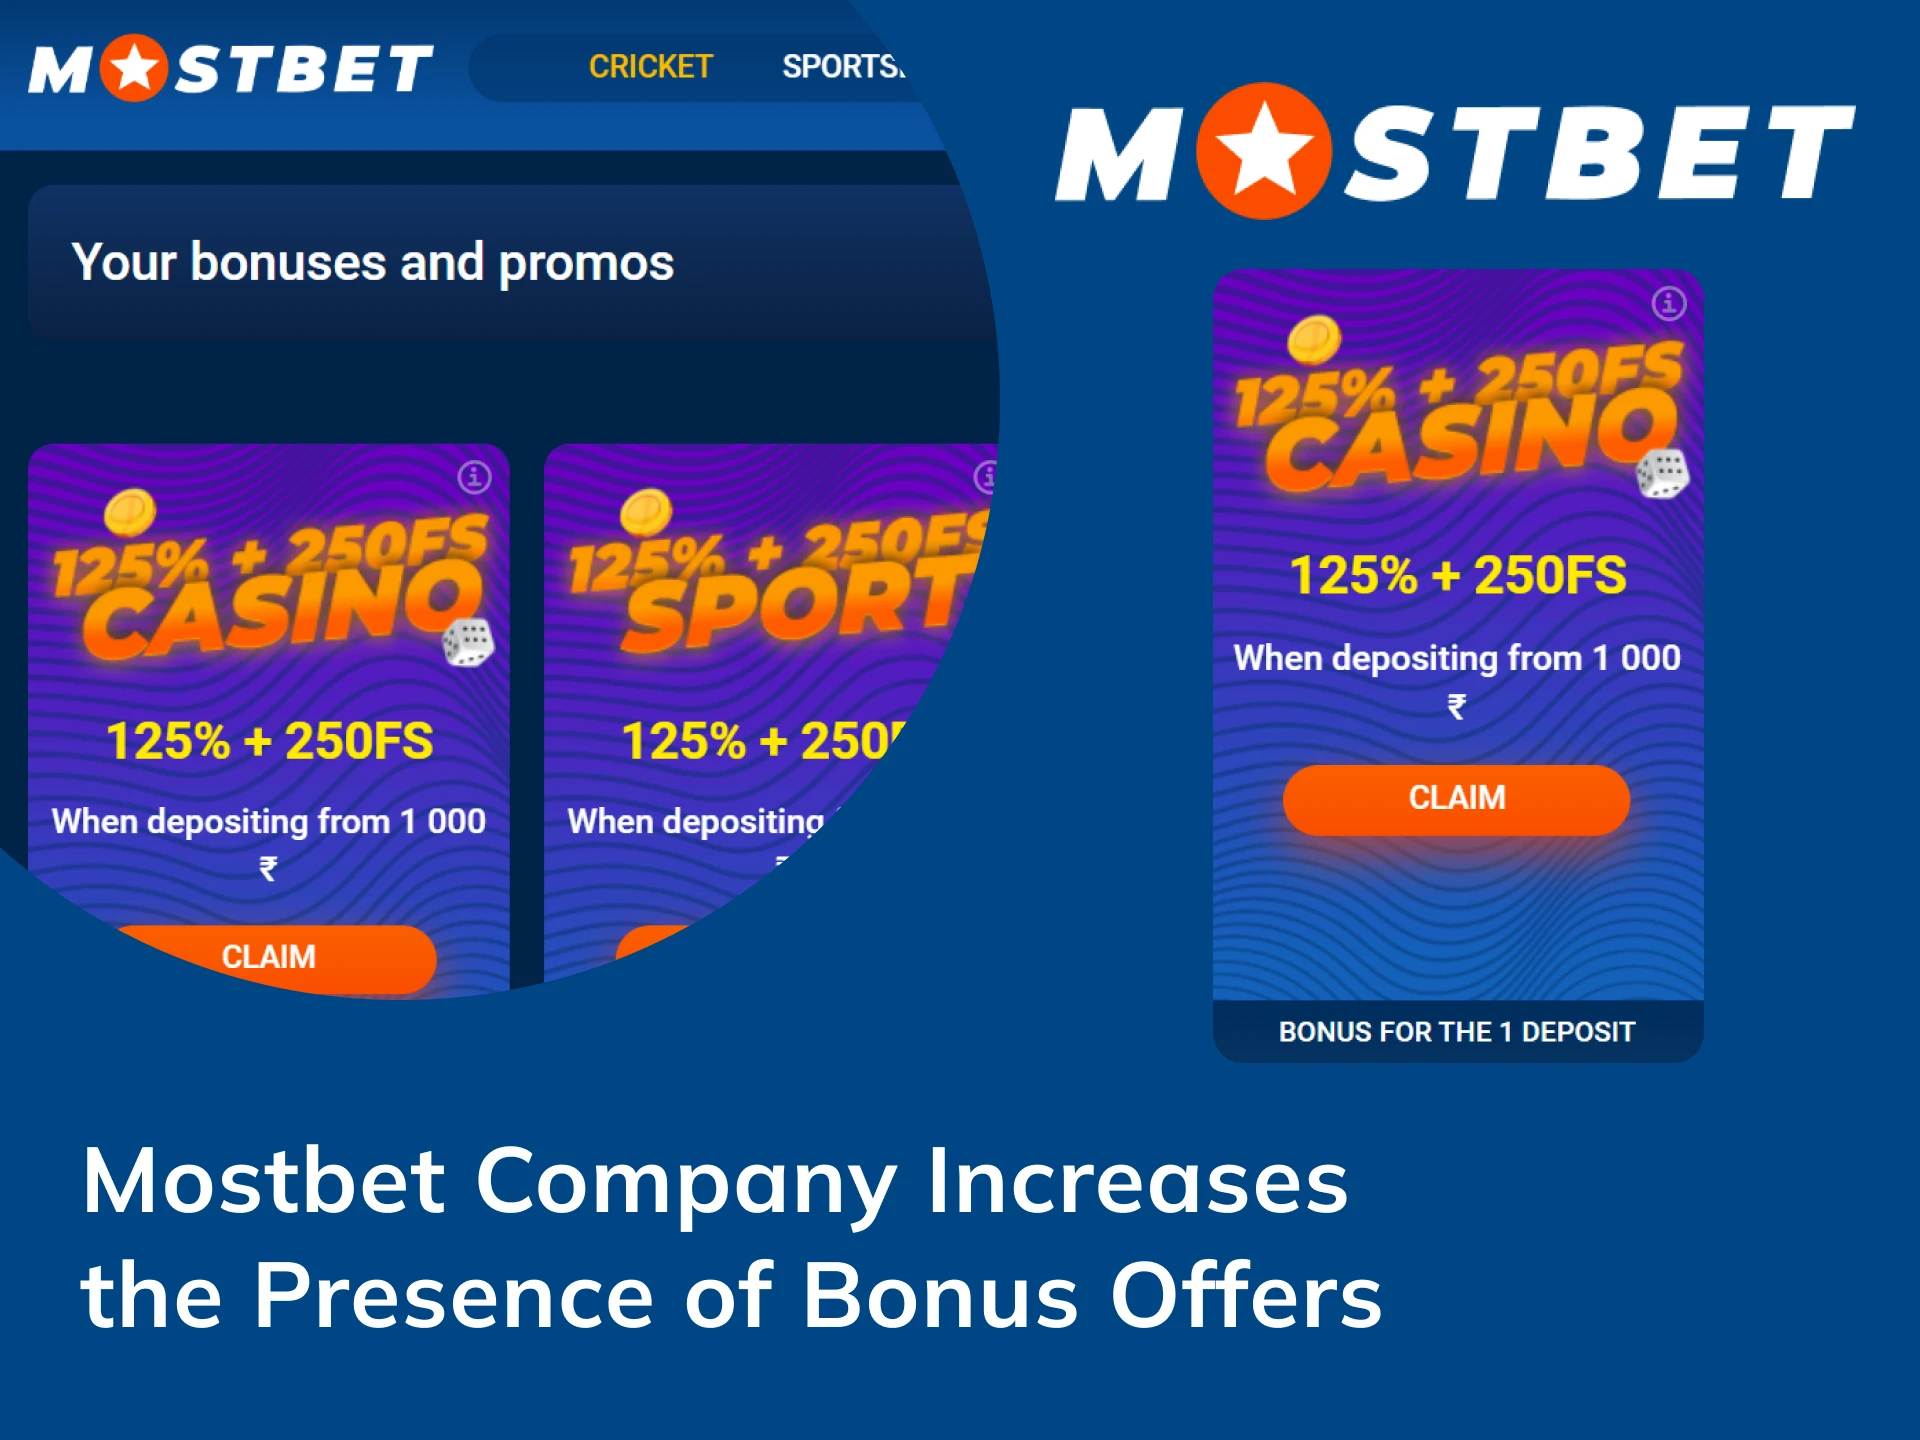 The Mostbet company offers its players many profitable bonuses.